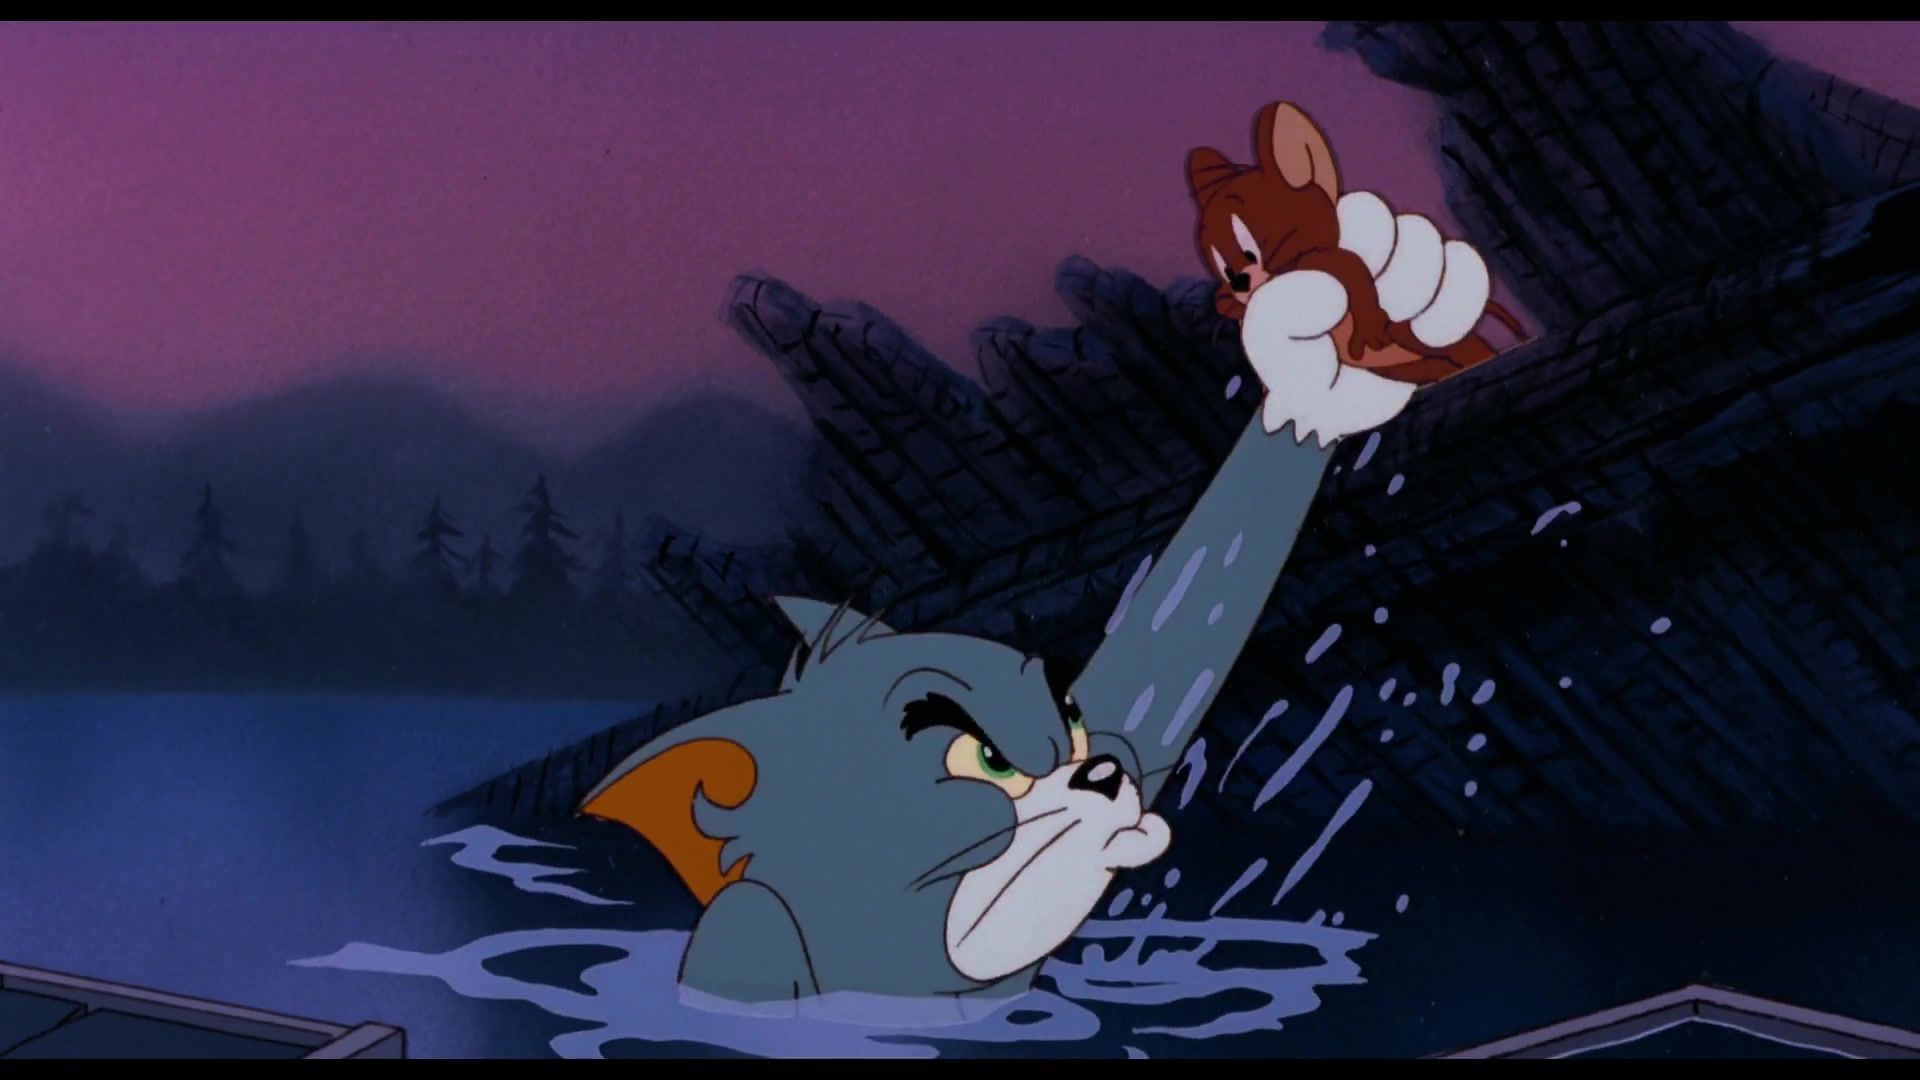 Tom swimming and holing Jerry above water